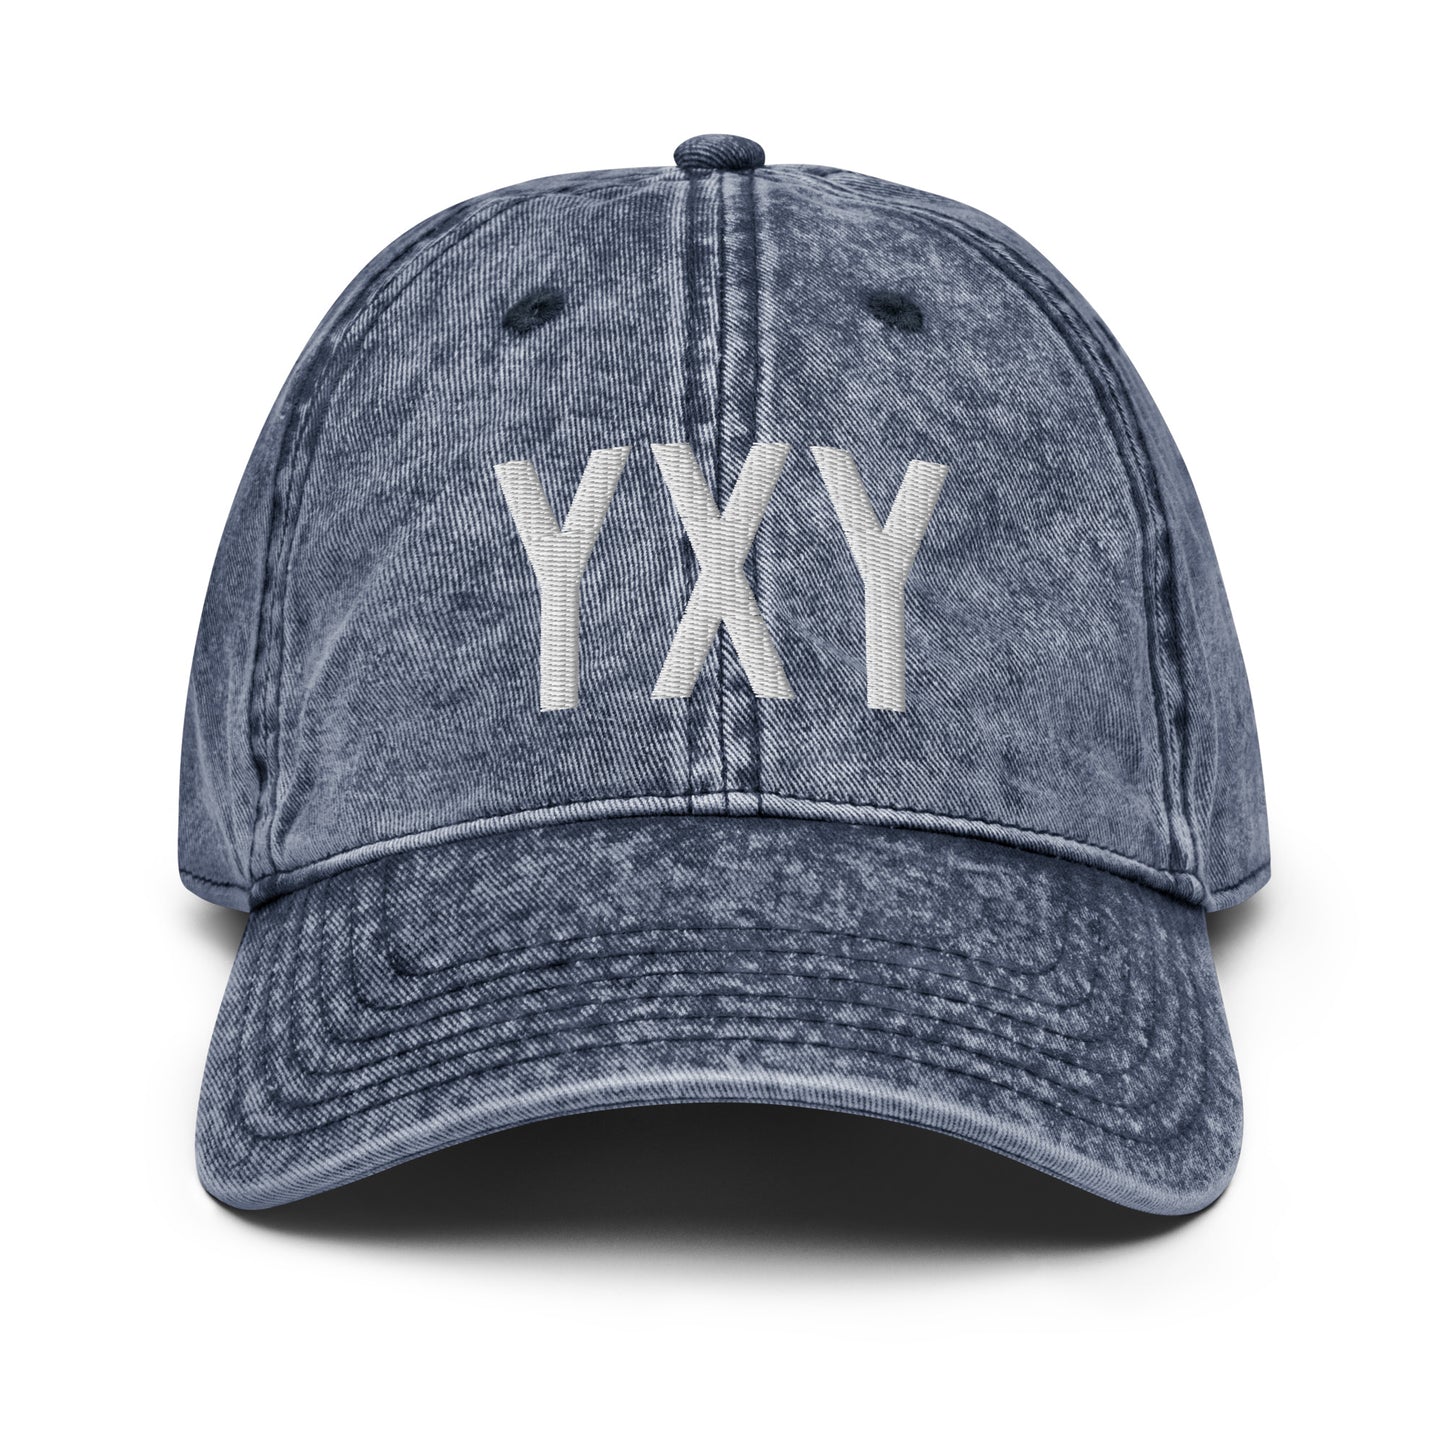 Airport Code Twill Cap - White • YXY Whitehorse • YHM Designs - Image 16